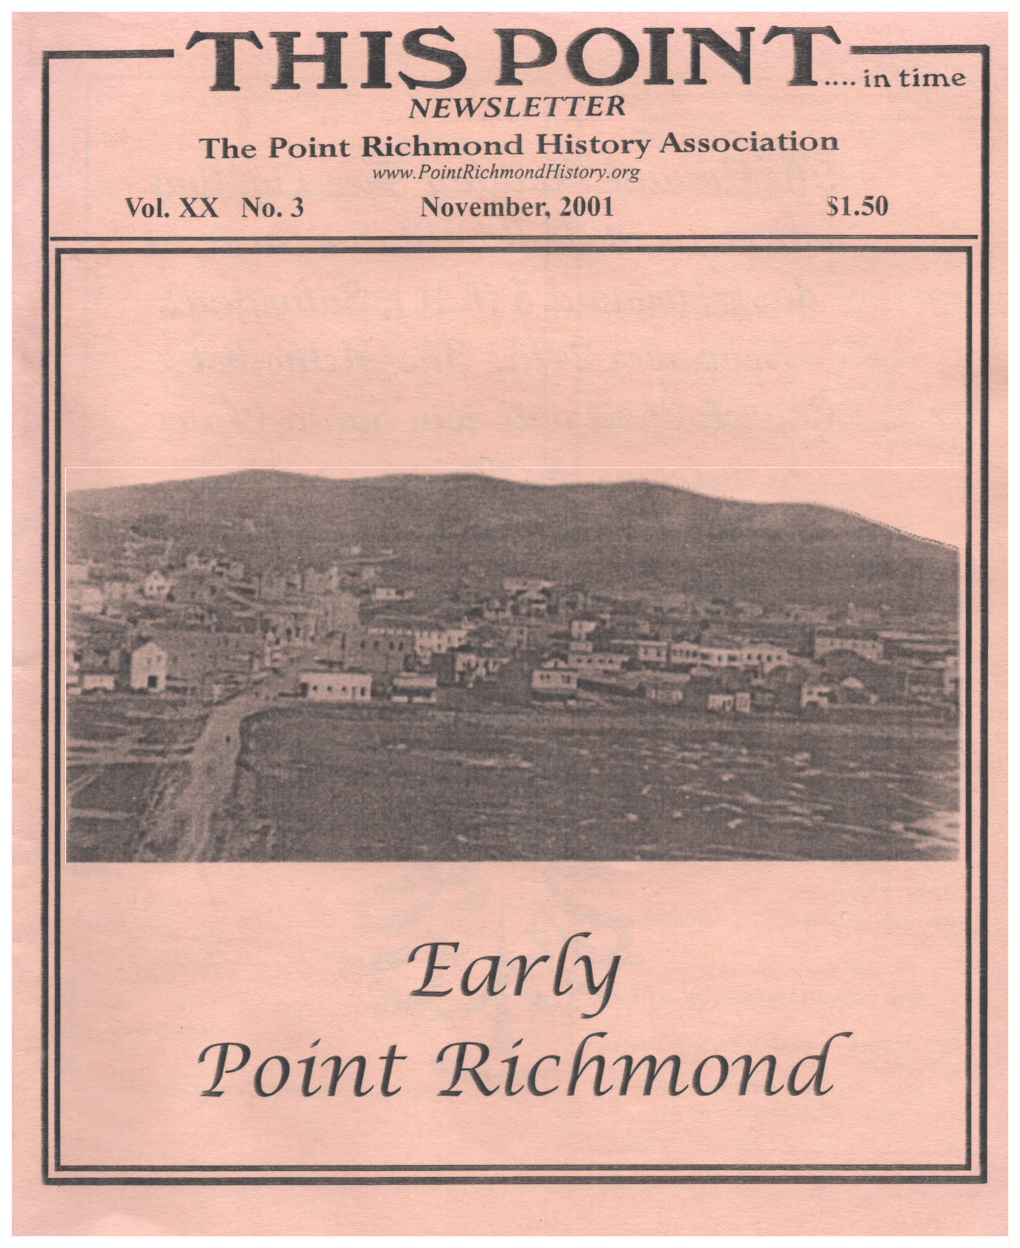 THIS POINT- NEWSLETTER the Point Richmond History Association Vol